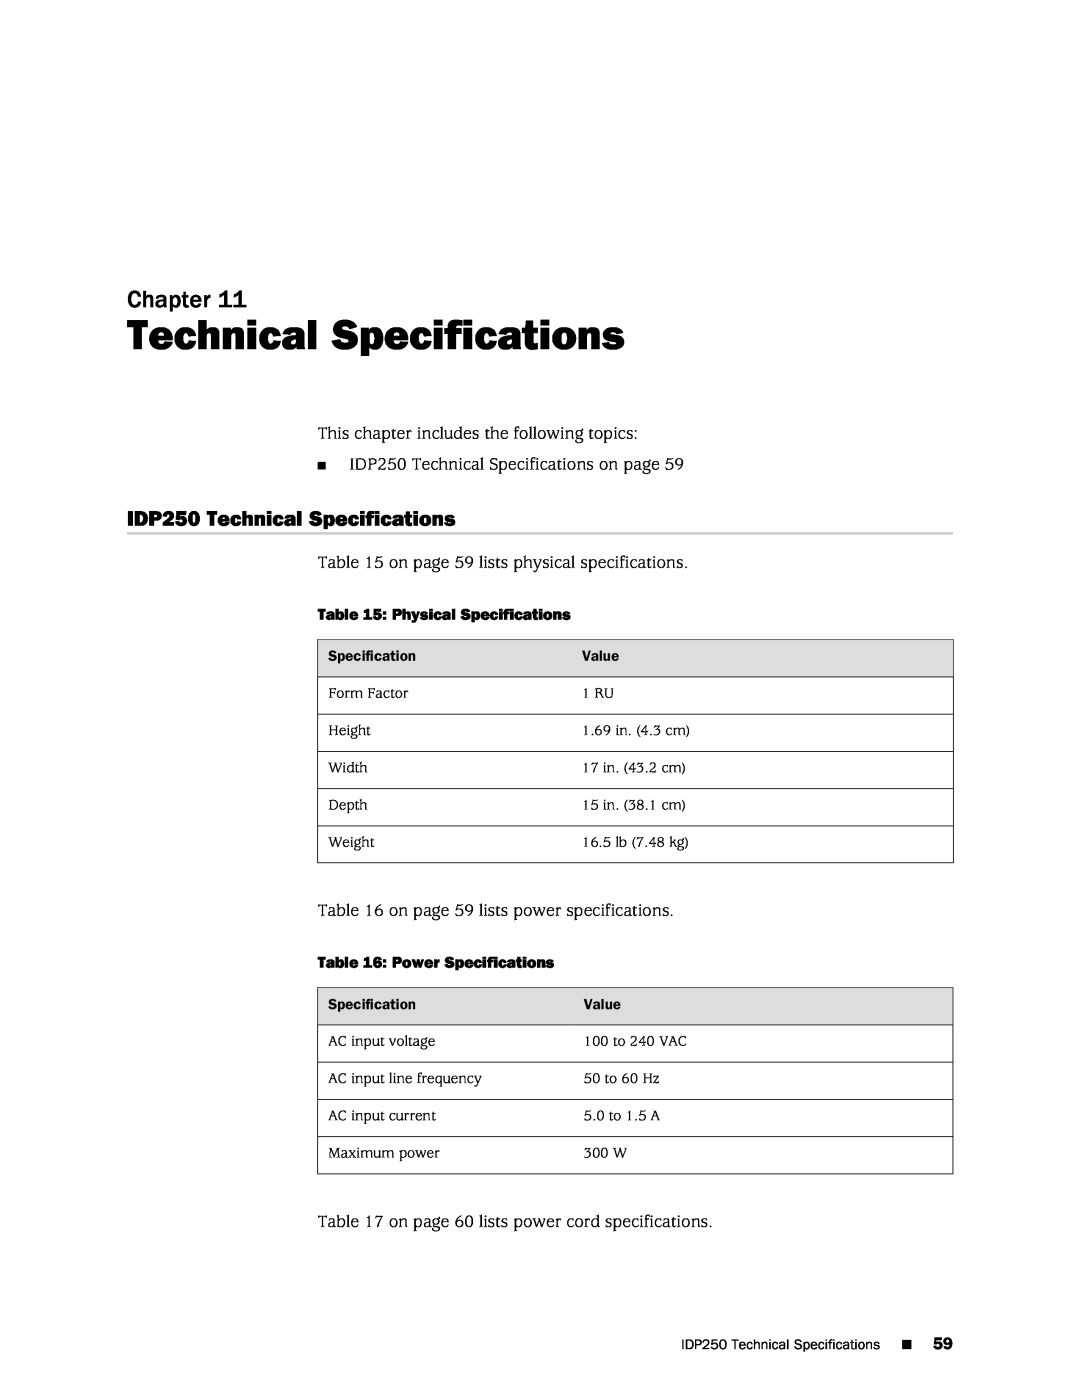 Juniper Networks manual IDP250 Technical Specifications, Chapter 